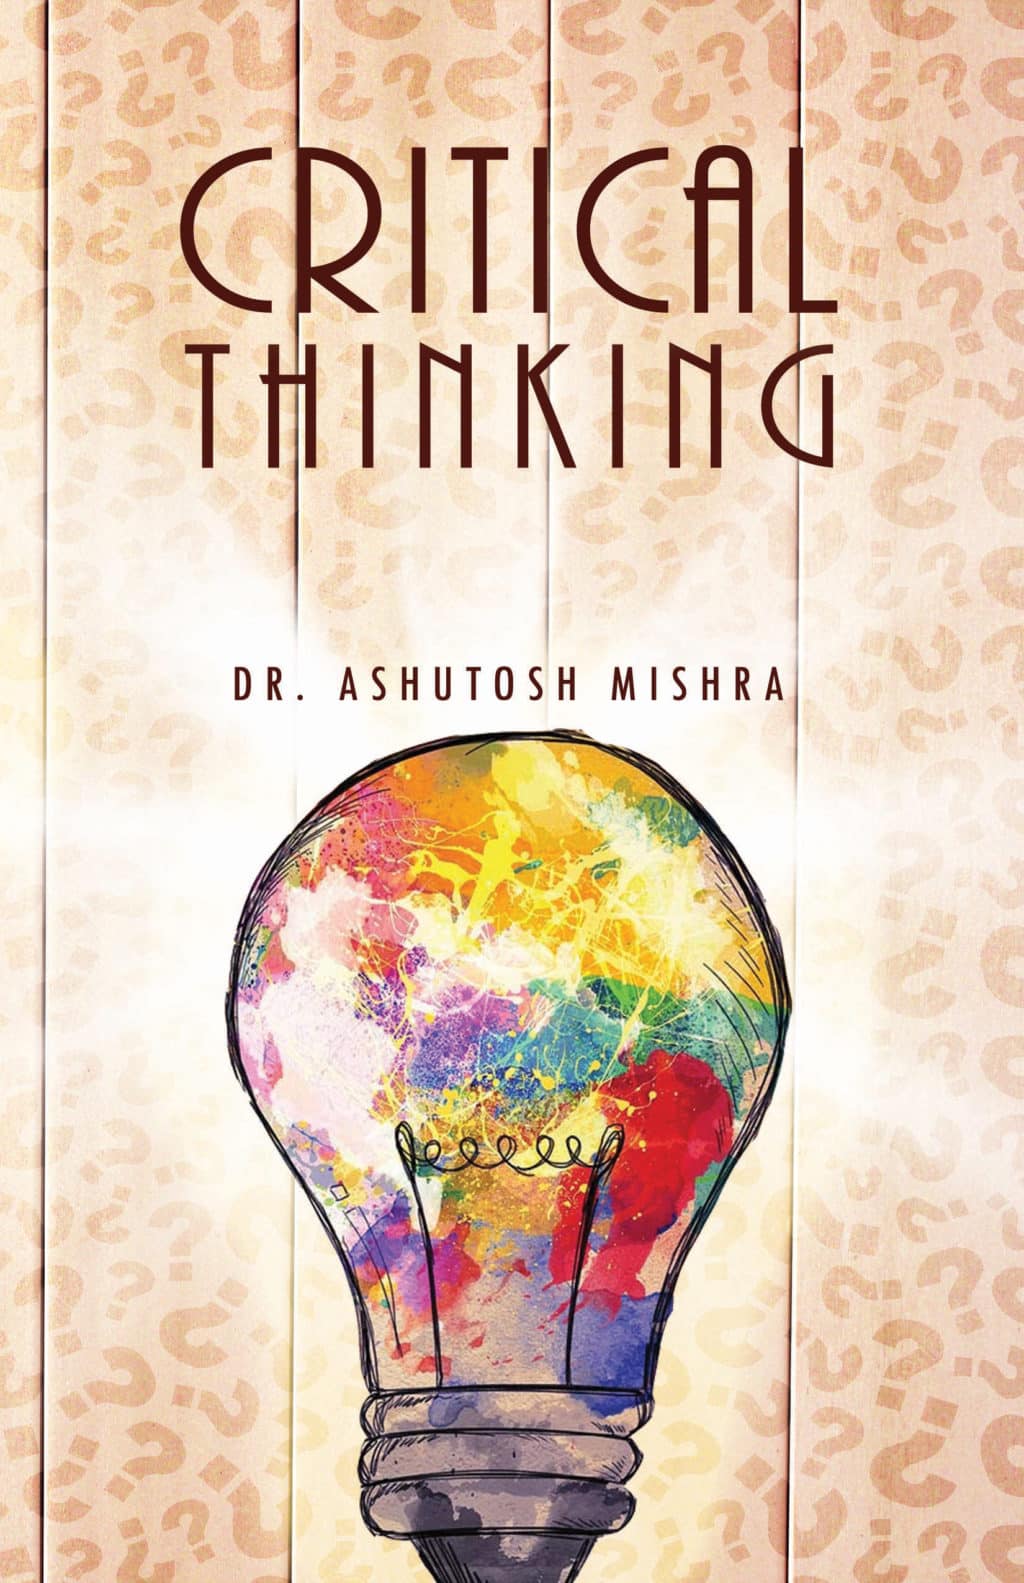 journal about critical thinking